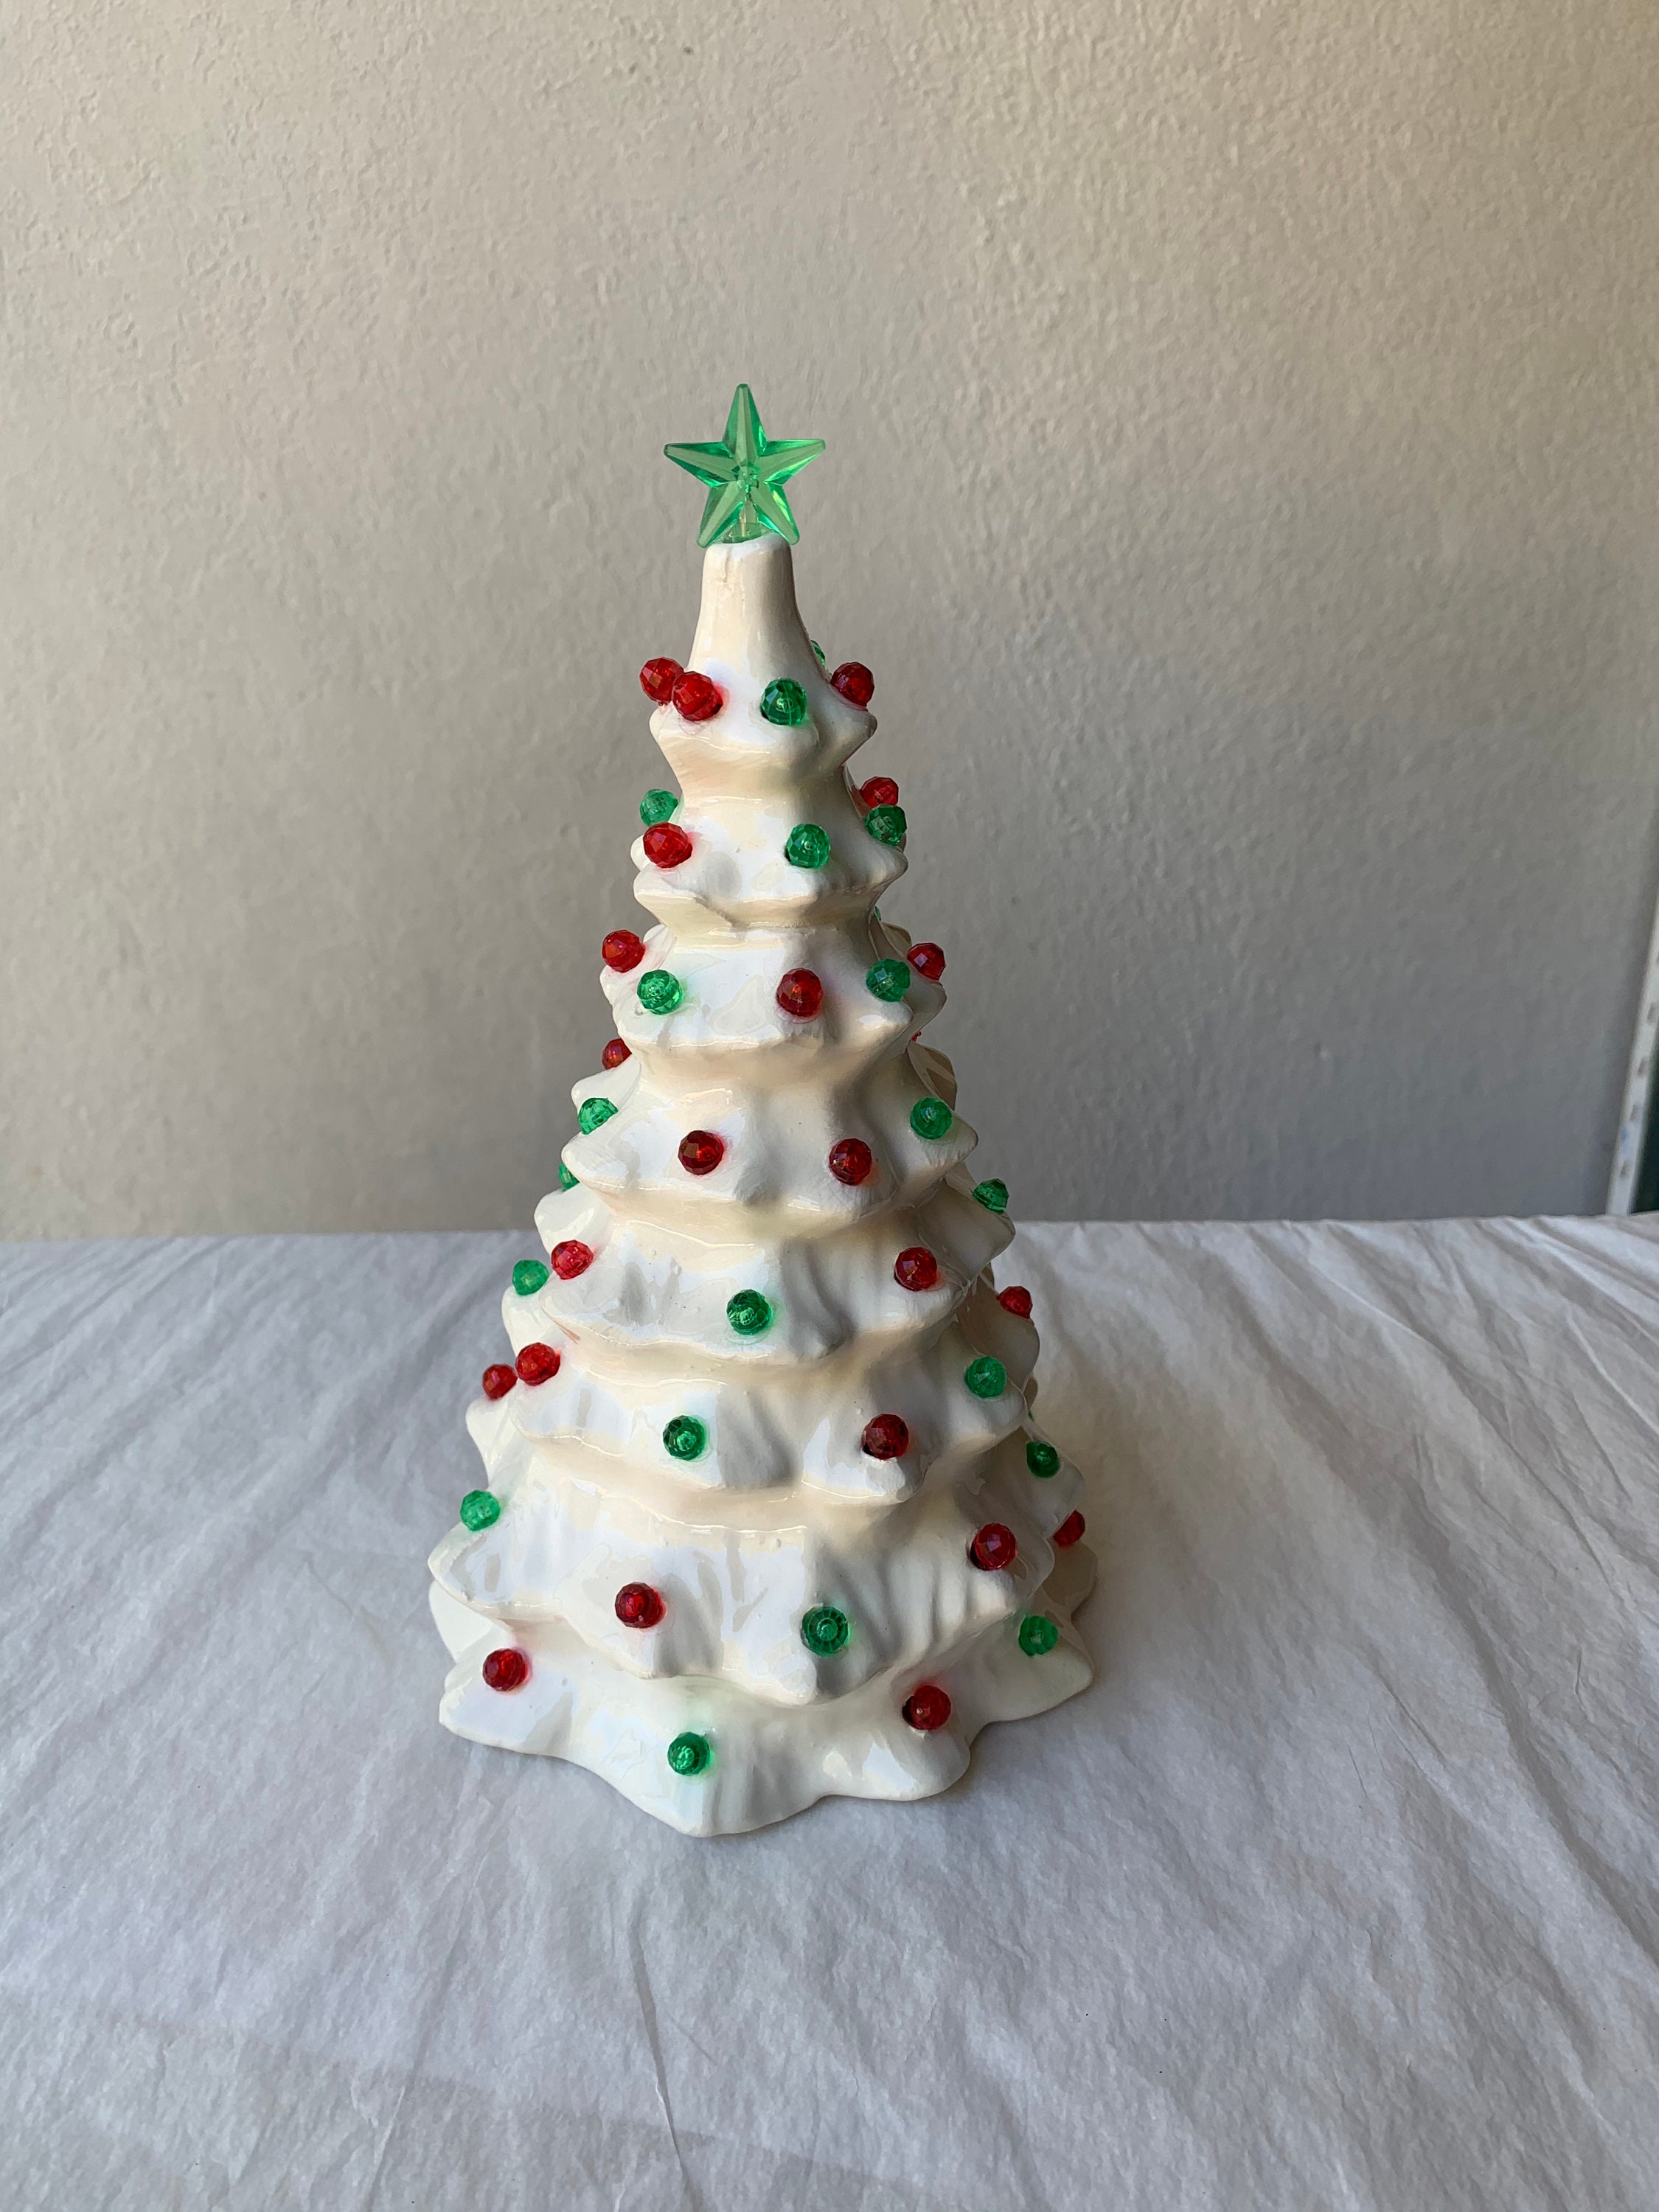 Christmas Small Glossy White Ceramic Tree with green and red | Etsy